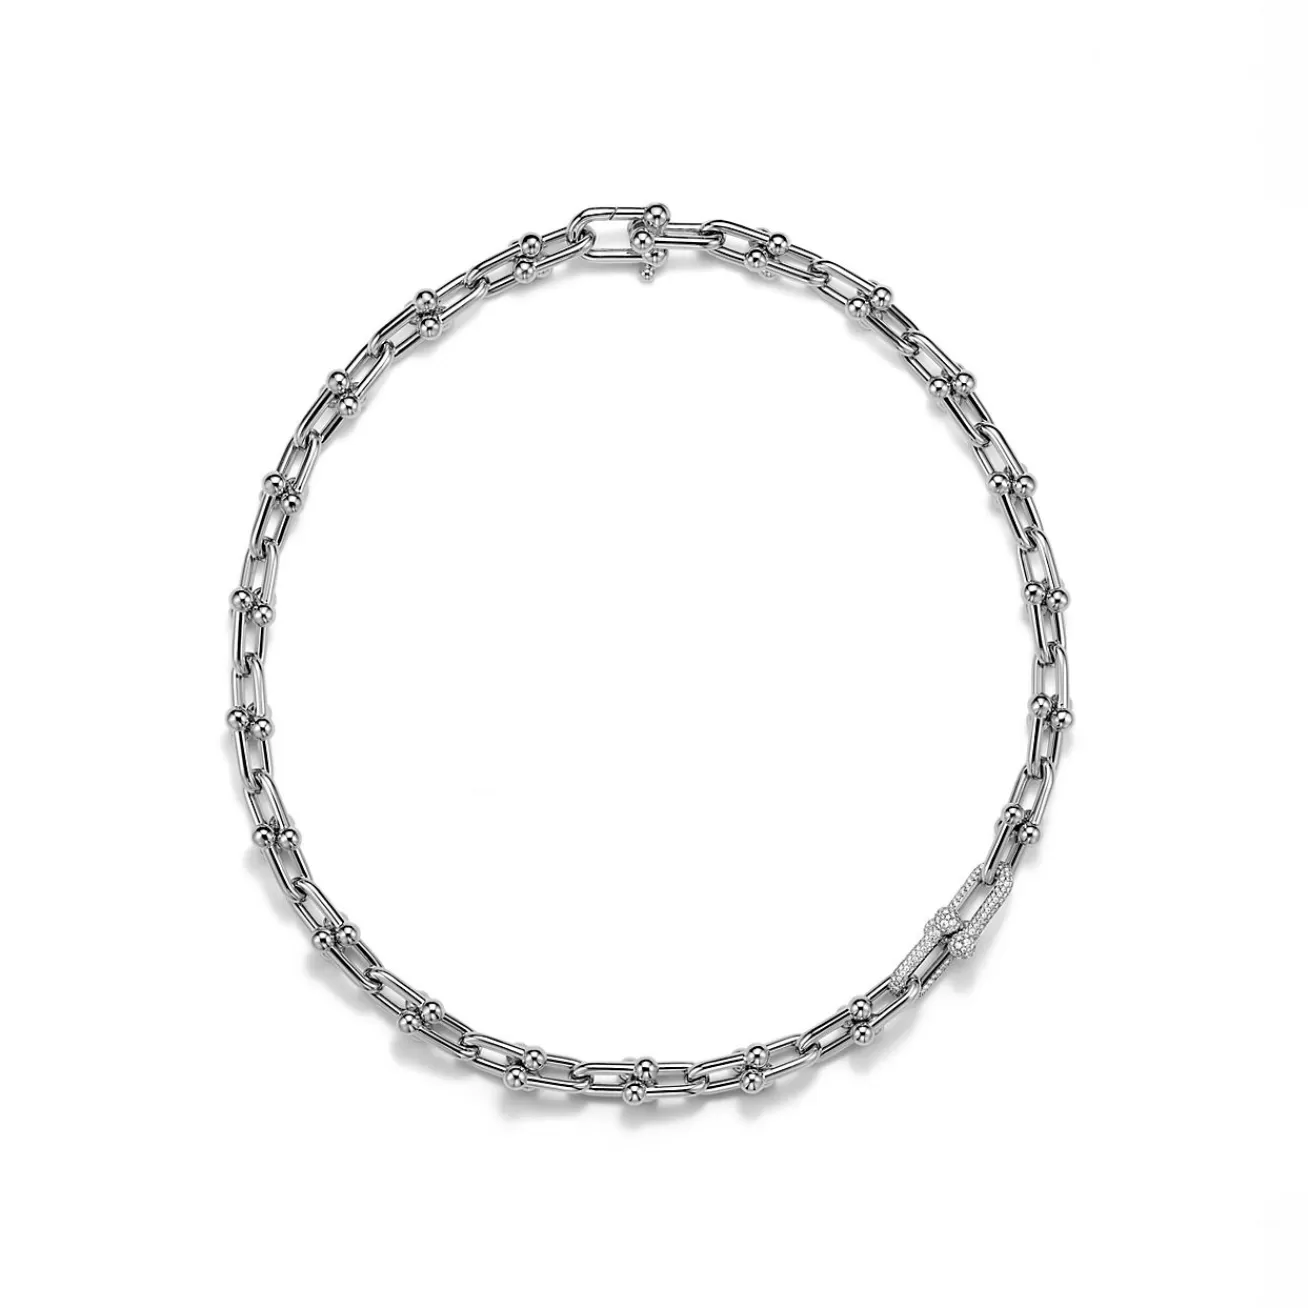 Tiffany & Co. Tiffany HardWear Medium Link Necklace in White Gold with Diamonds | ^ Necklaces & Pendants | Men's Jewelry